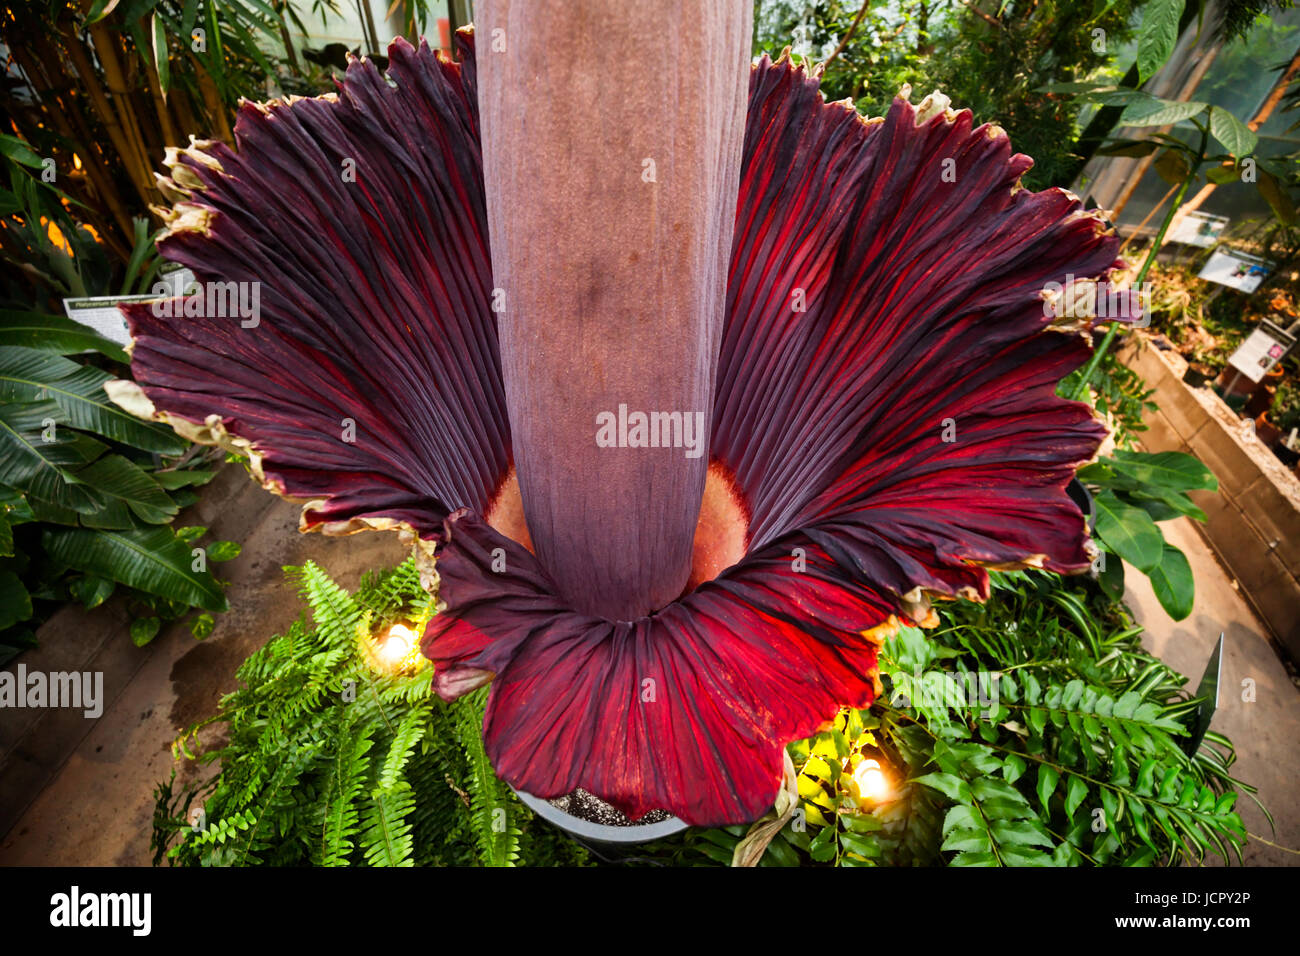 A titan arum or Amorphophallus titanum in full bloom, it is a flowering plant or carrion flower that is native to Western Sumatra. Stock Photo